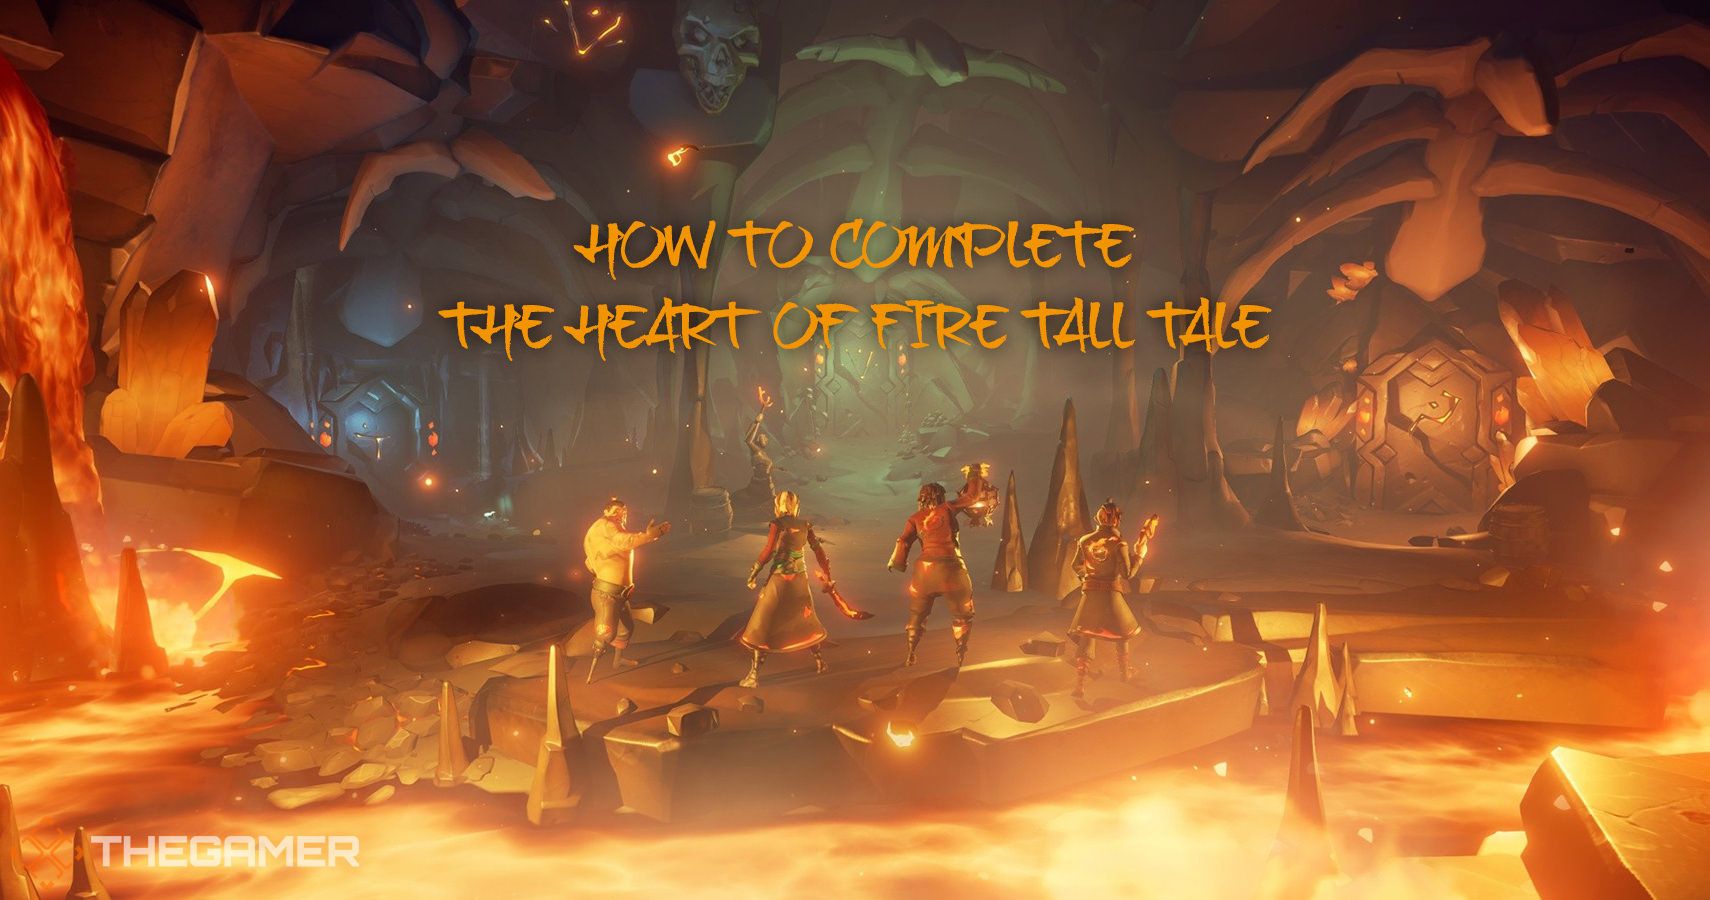 sea-of-thieves-how-to-complete-the-heart-of-fire-tall-tale